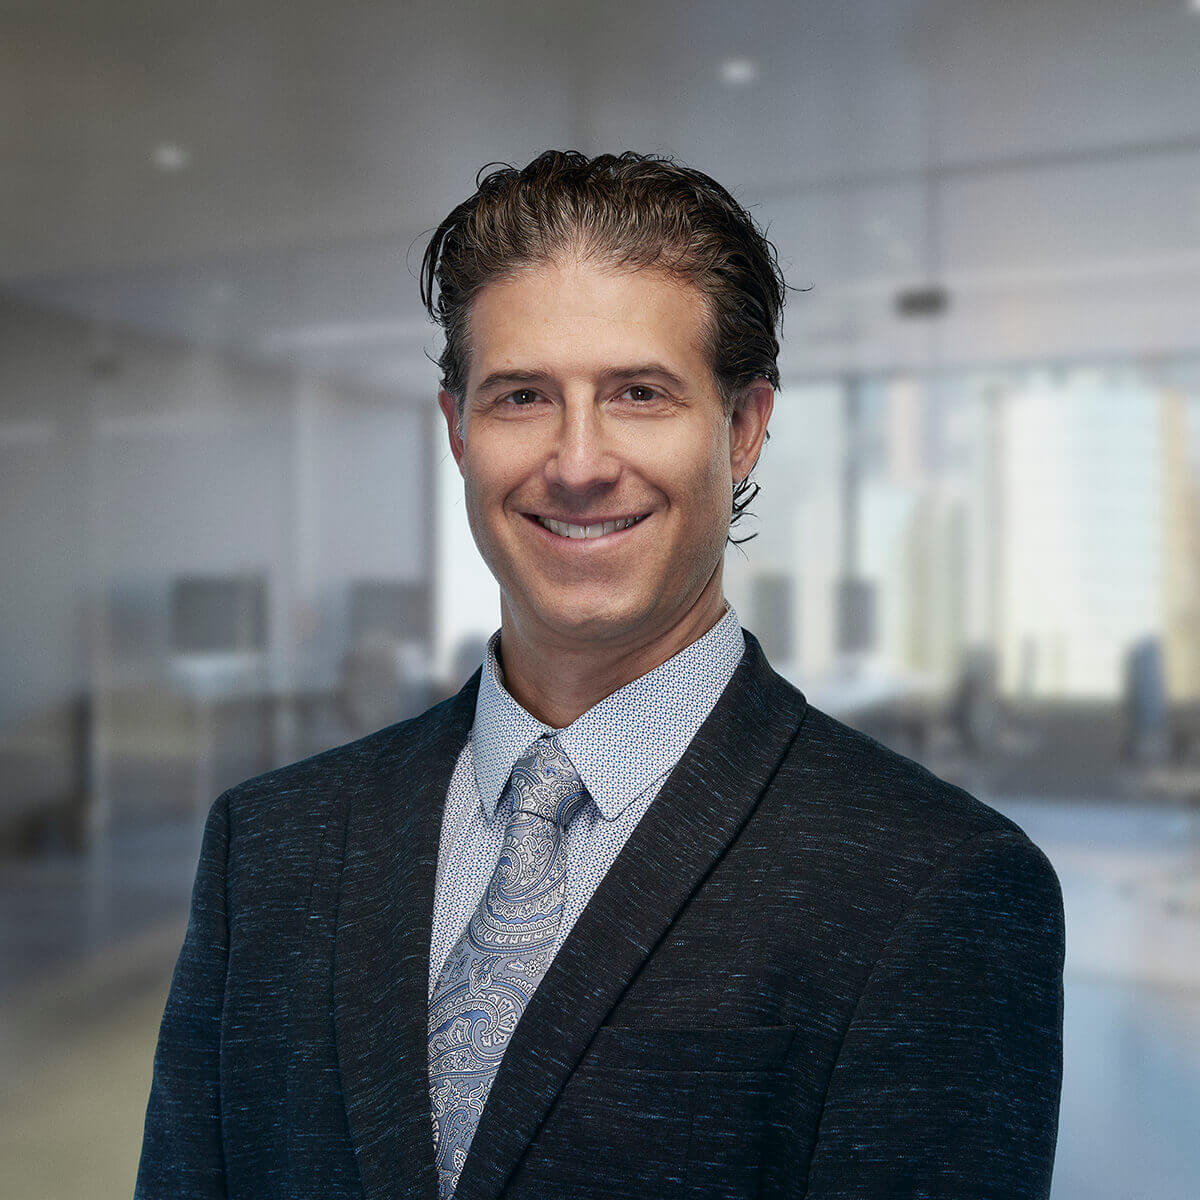 An image of Greg Newman, one of the principals and co-founders of Keystone Commercial Real Estate.